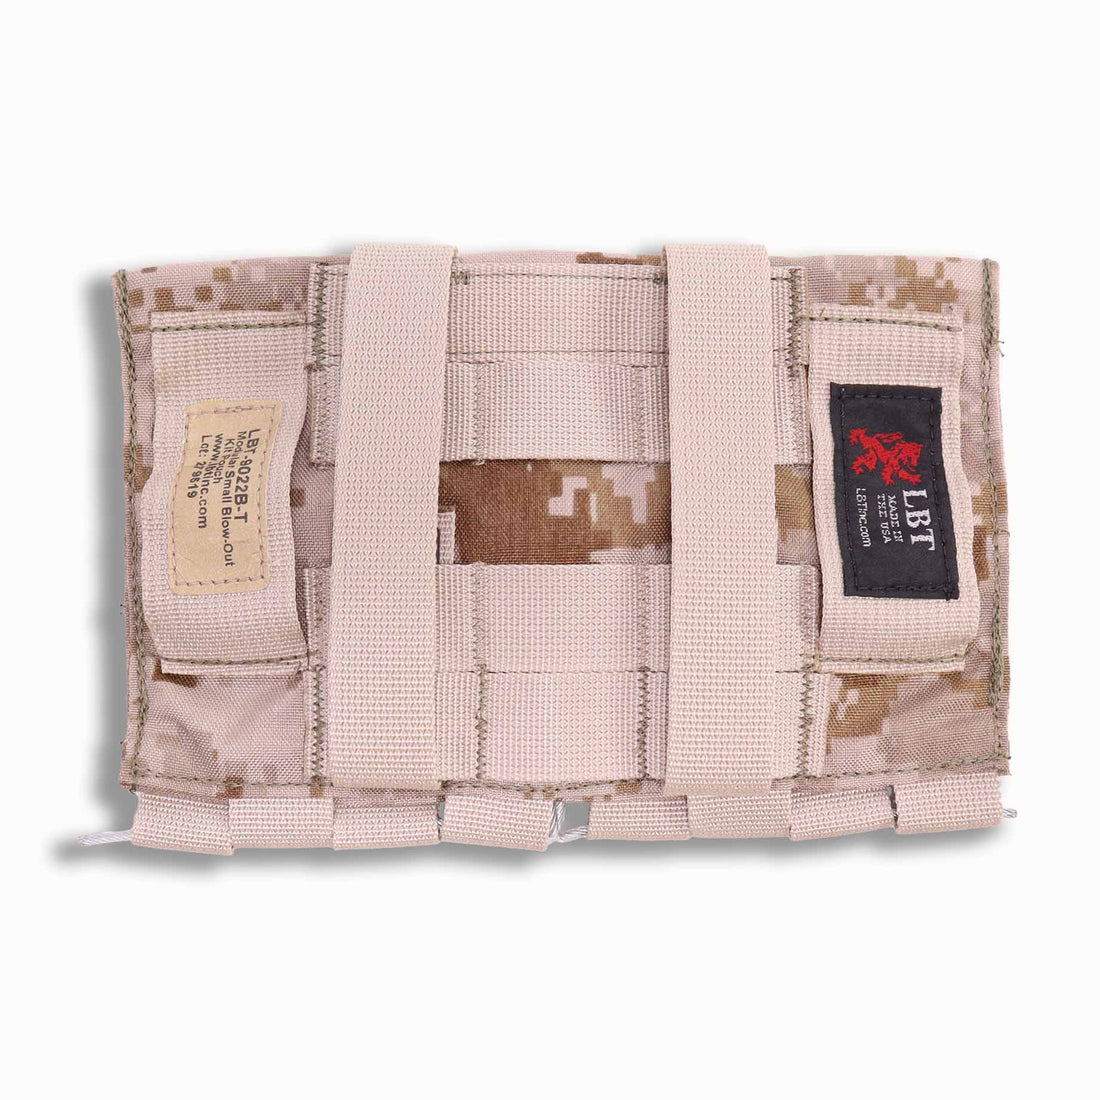 Gear - Pouches - Medical - London Bridge Trading LBT-9022B-T Small Blow Out Medical Pouch - AOR1